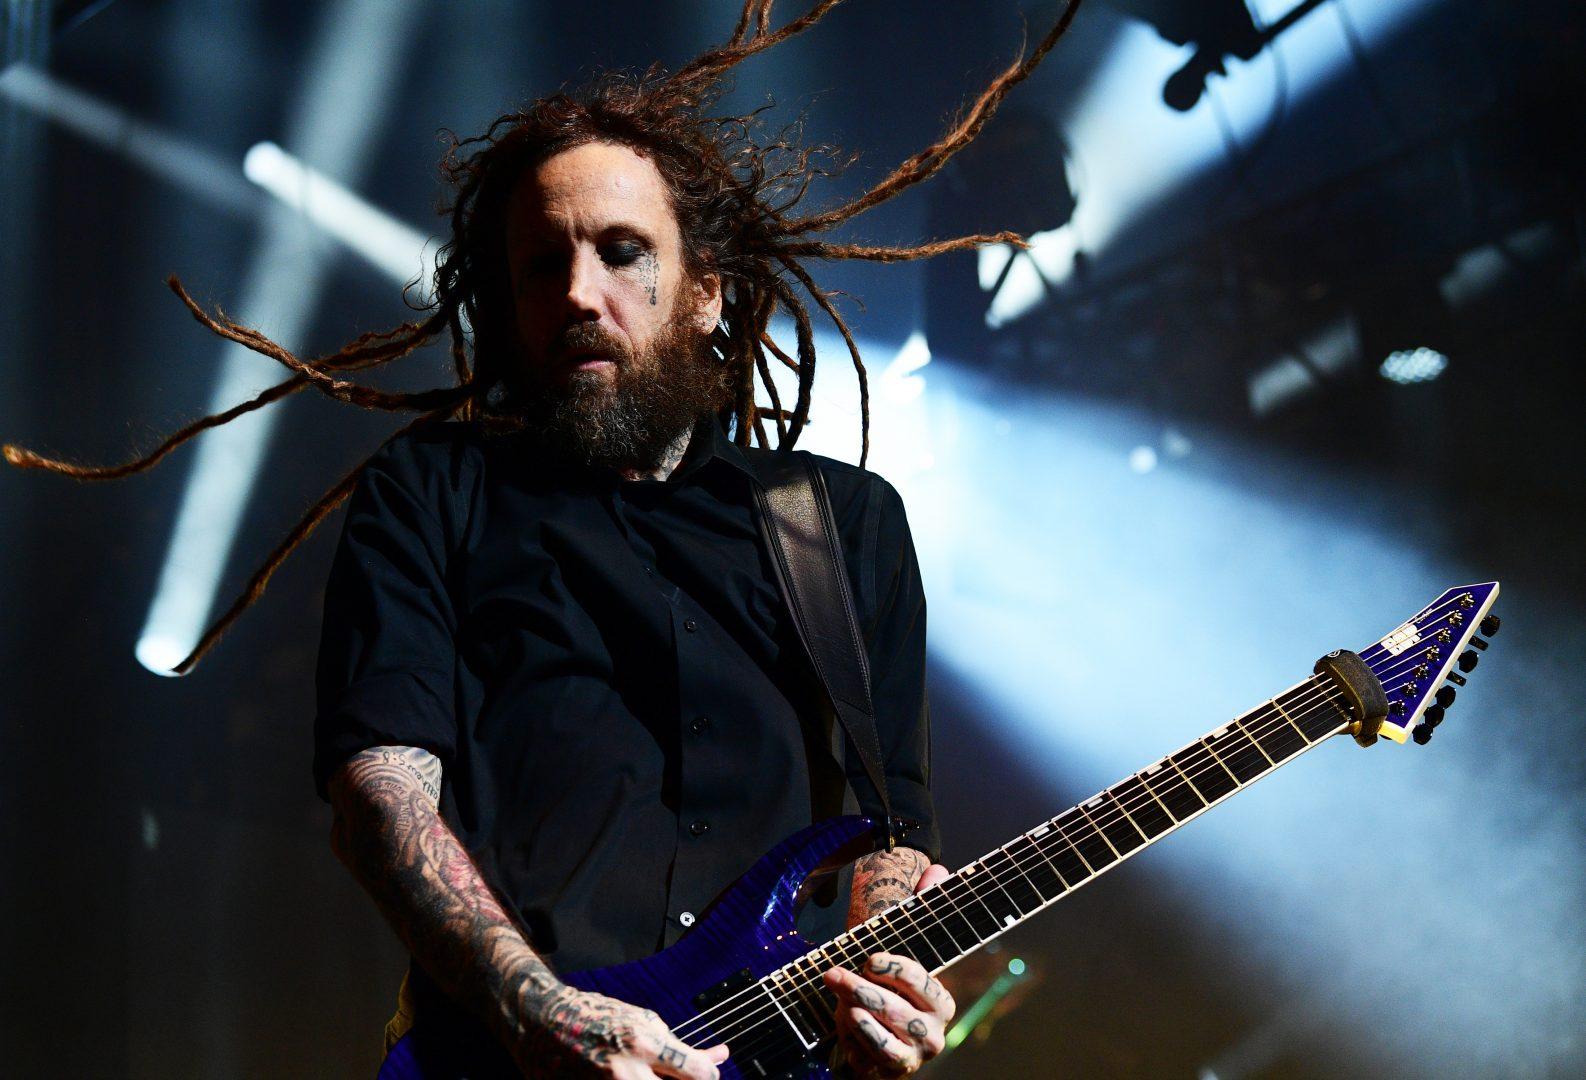 Brian Welch of Korn performs on stage during a concert, Friday night at Blossom Music Center. (David Dermer/Special to the Plain Dealer)